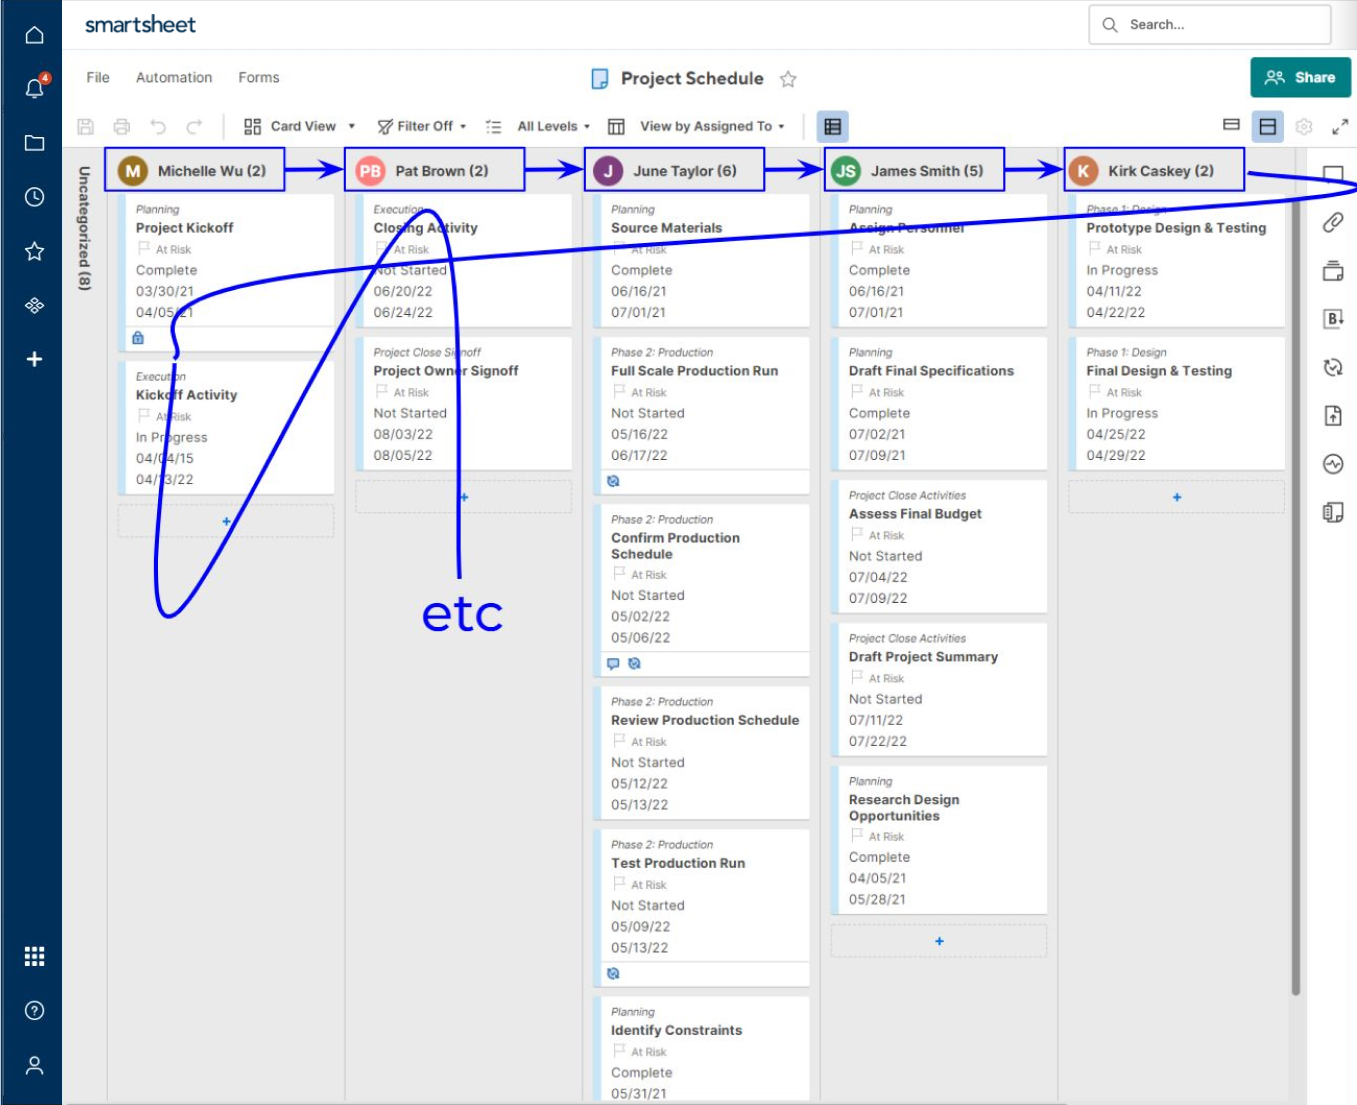 An image of a Smartsheet user interface marked up to show the tab order in Card View.